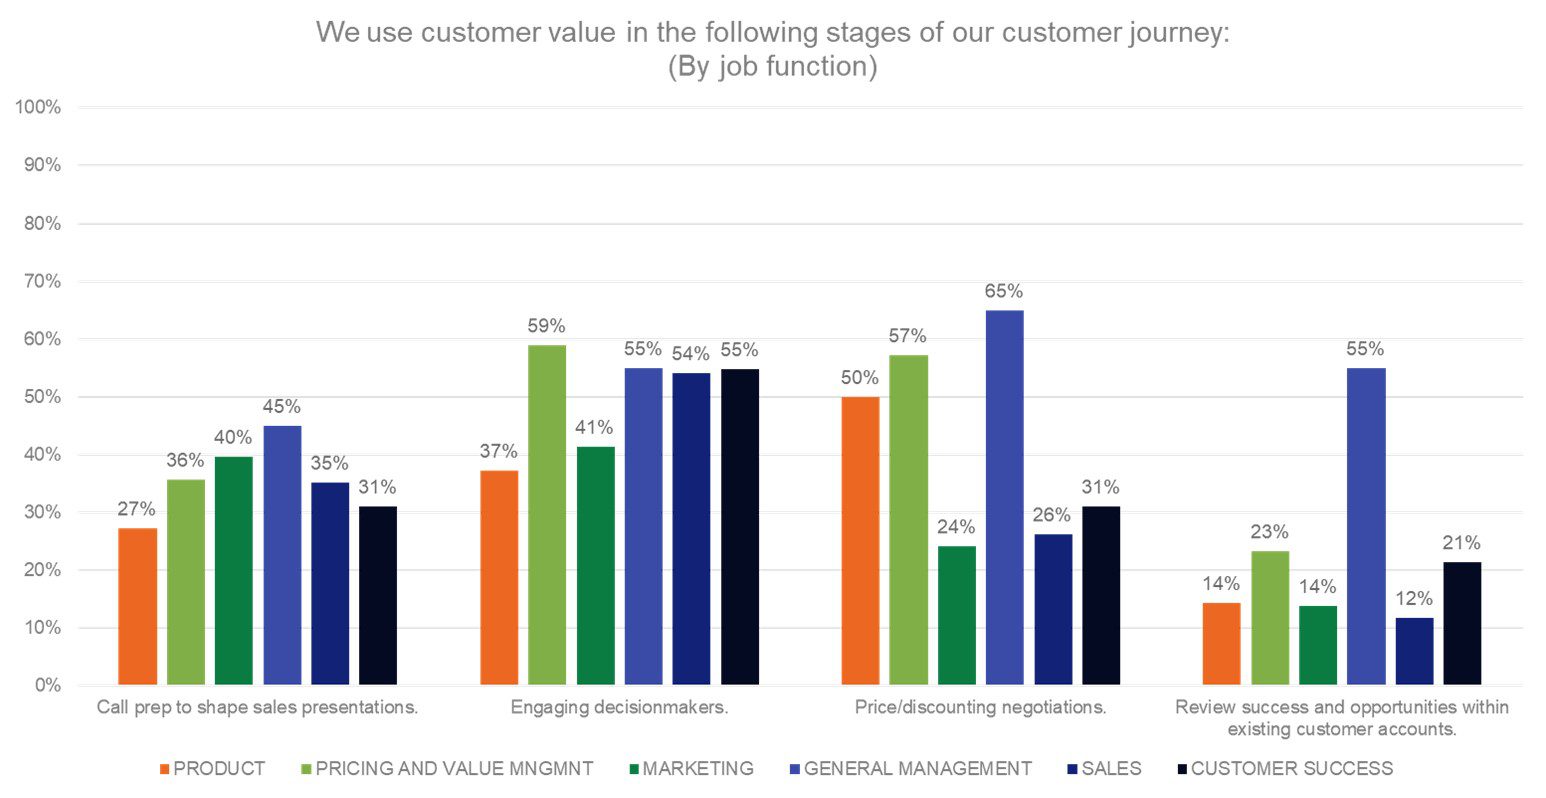 Customer Value Usage by Buying Stage - Job Function Breakout